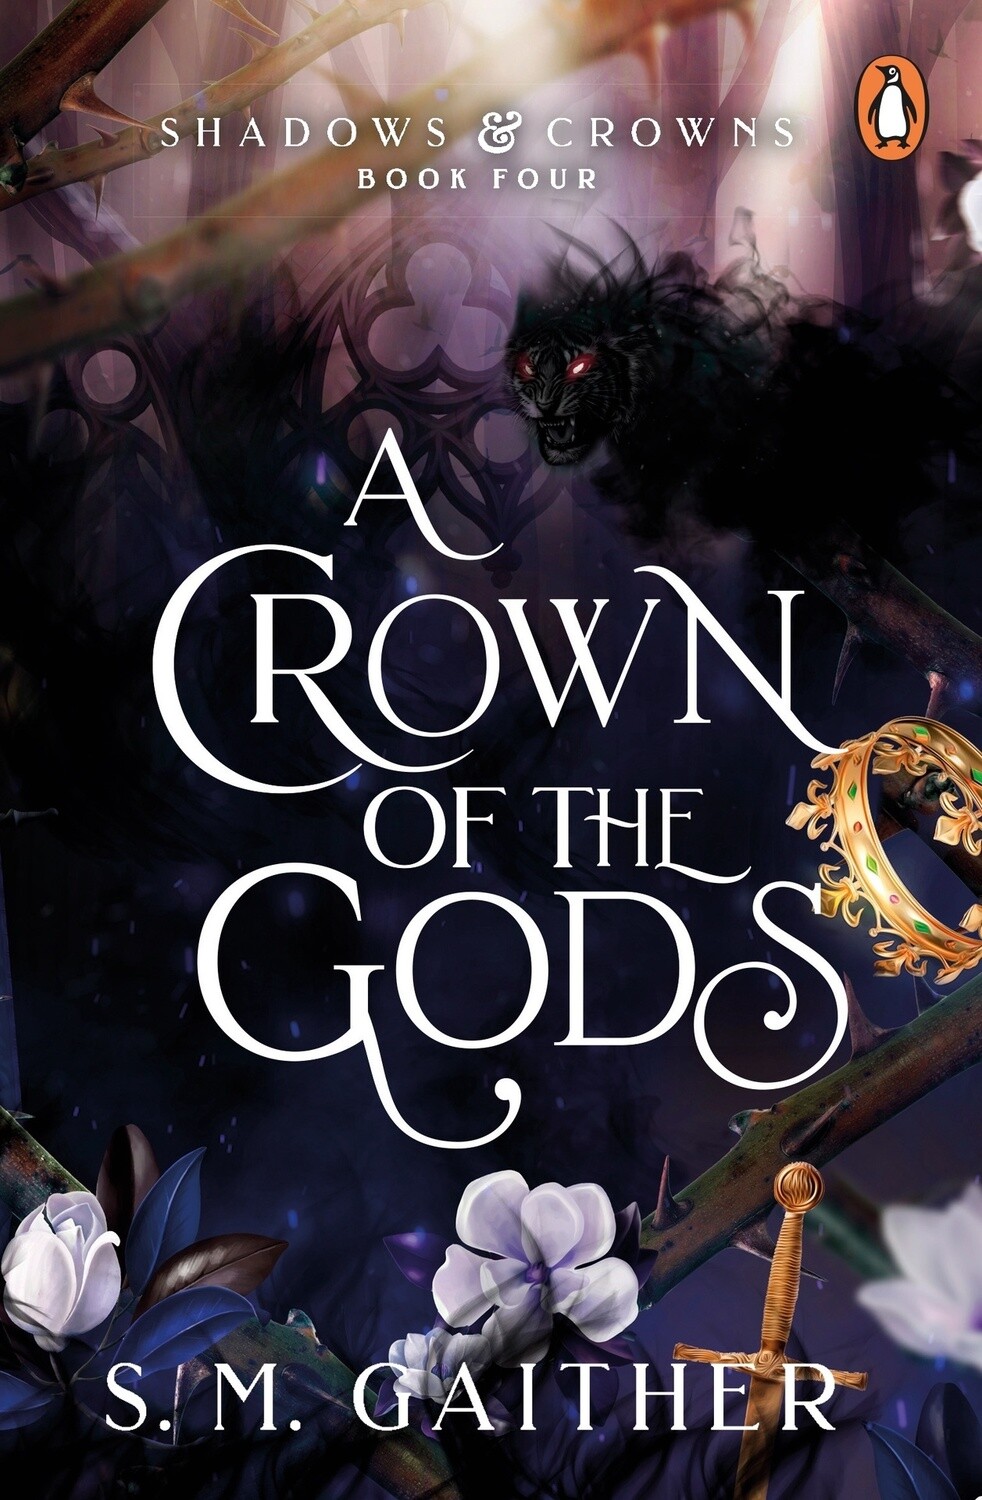 A Crown of the Gods (Shadow and Crowns Book 4) by S. M. Gaither